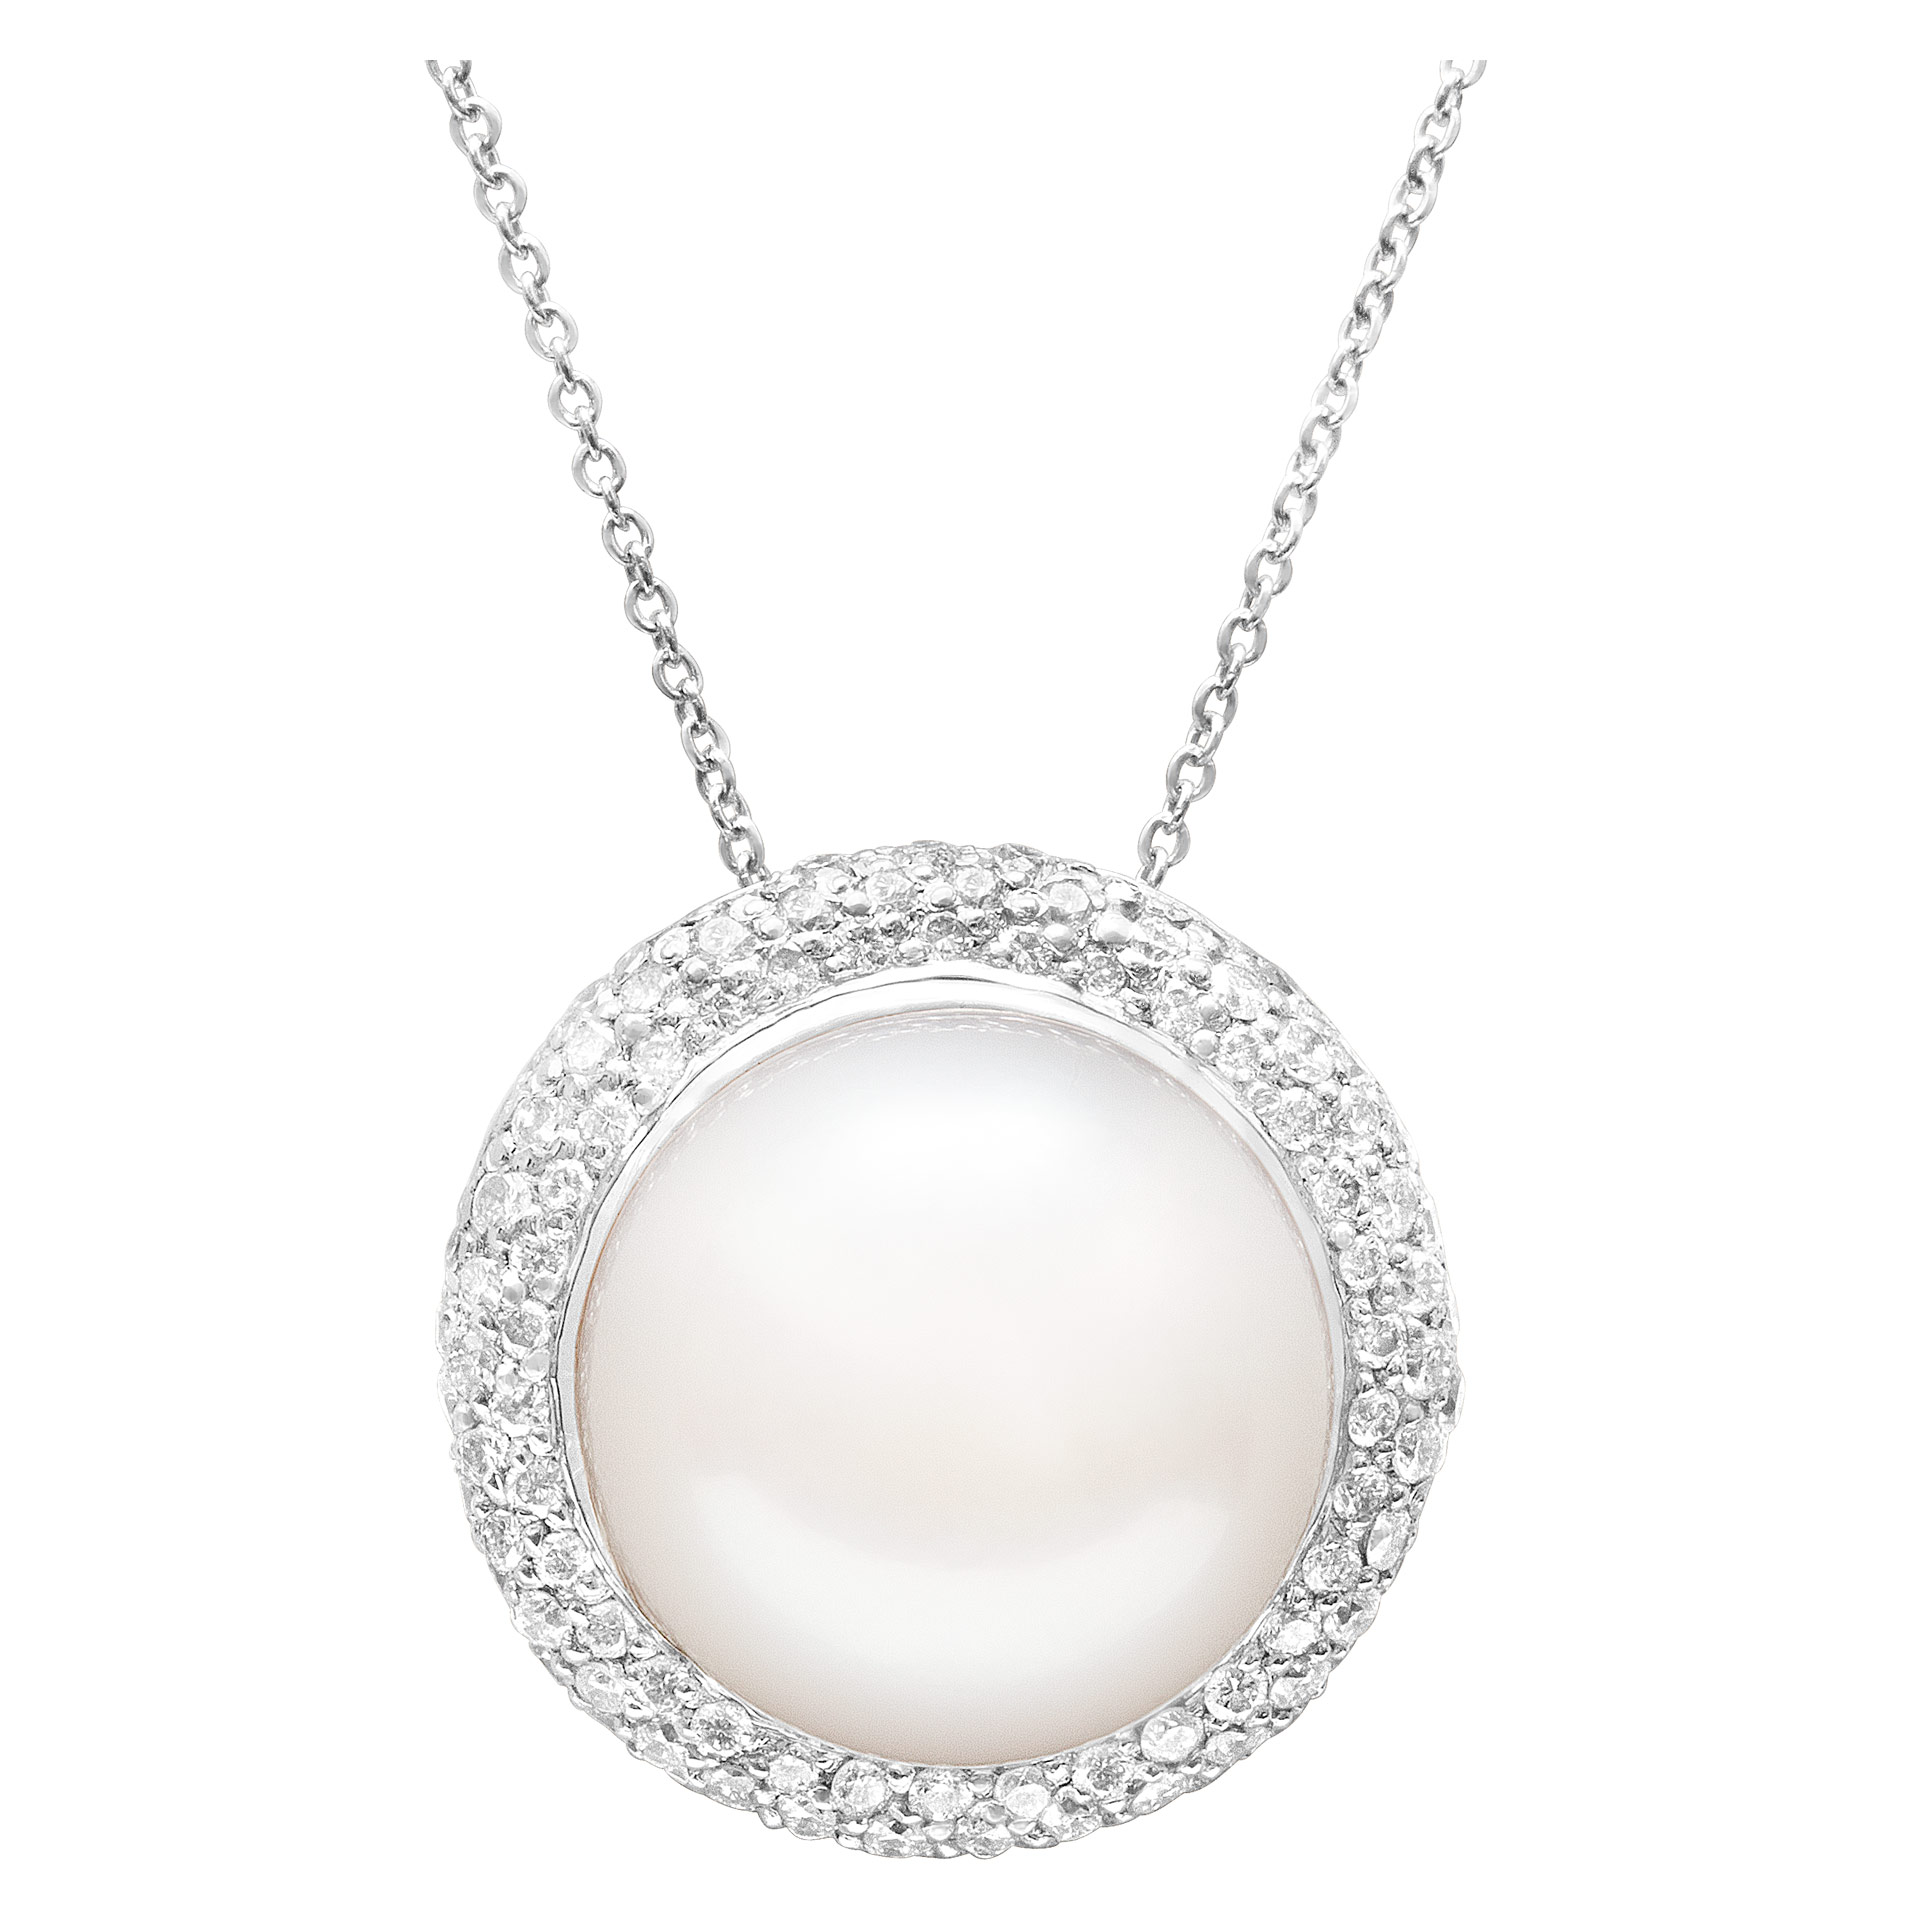 South Sea pearl pendant necklace with diamonds in 18k white gold chain. 0.77cts image 1